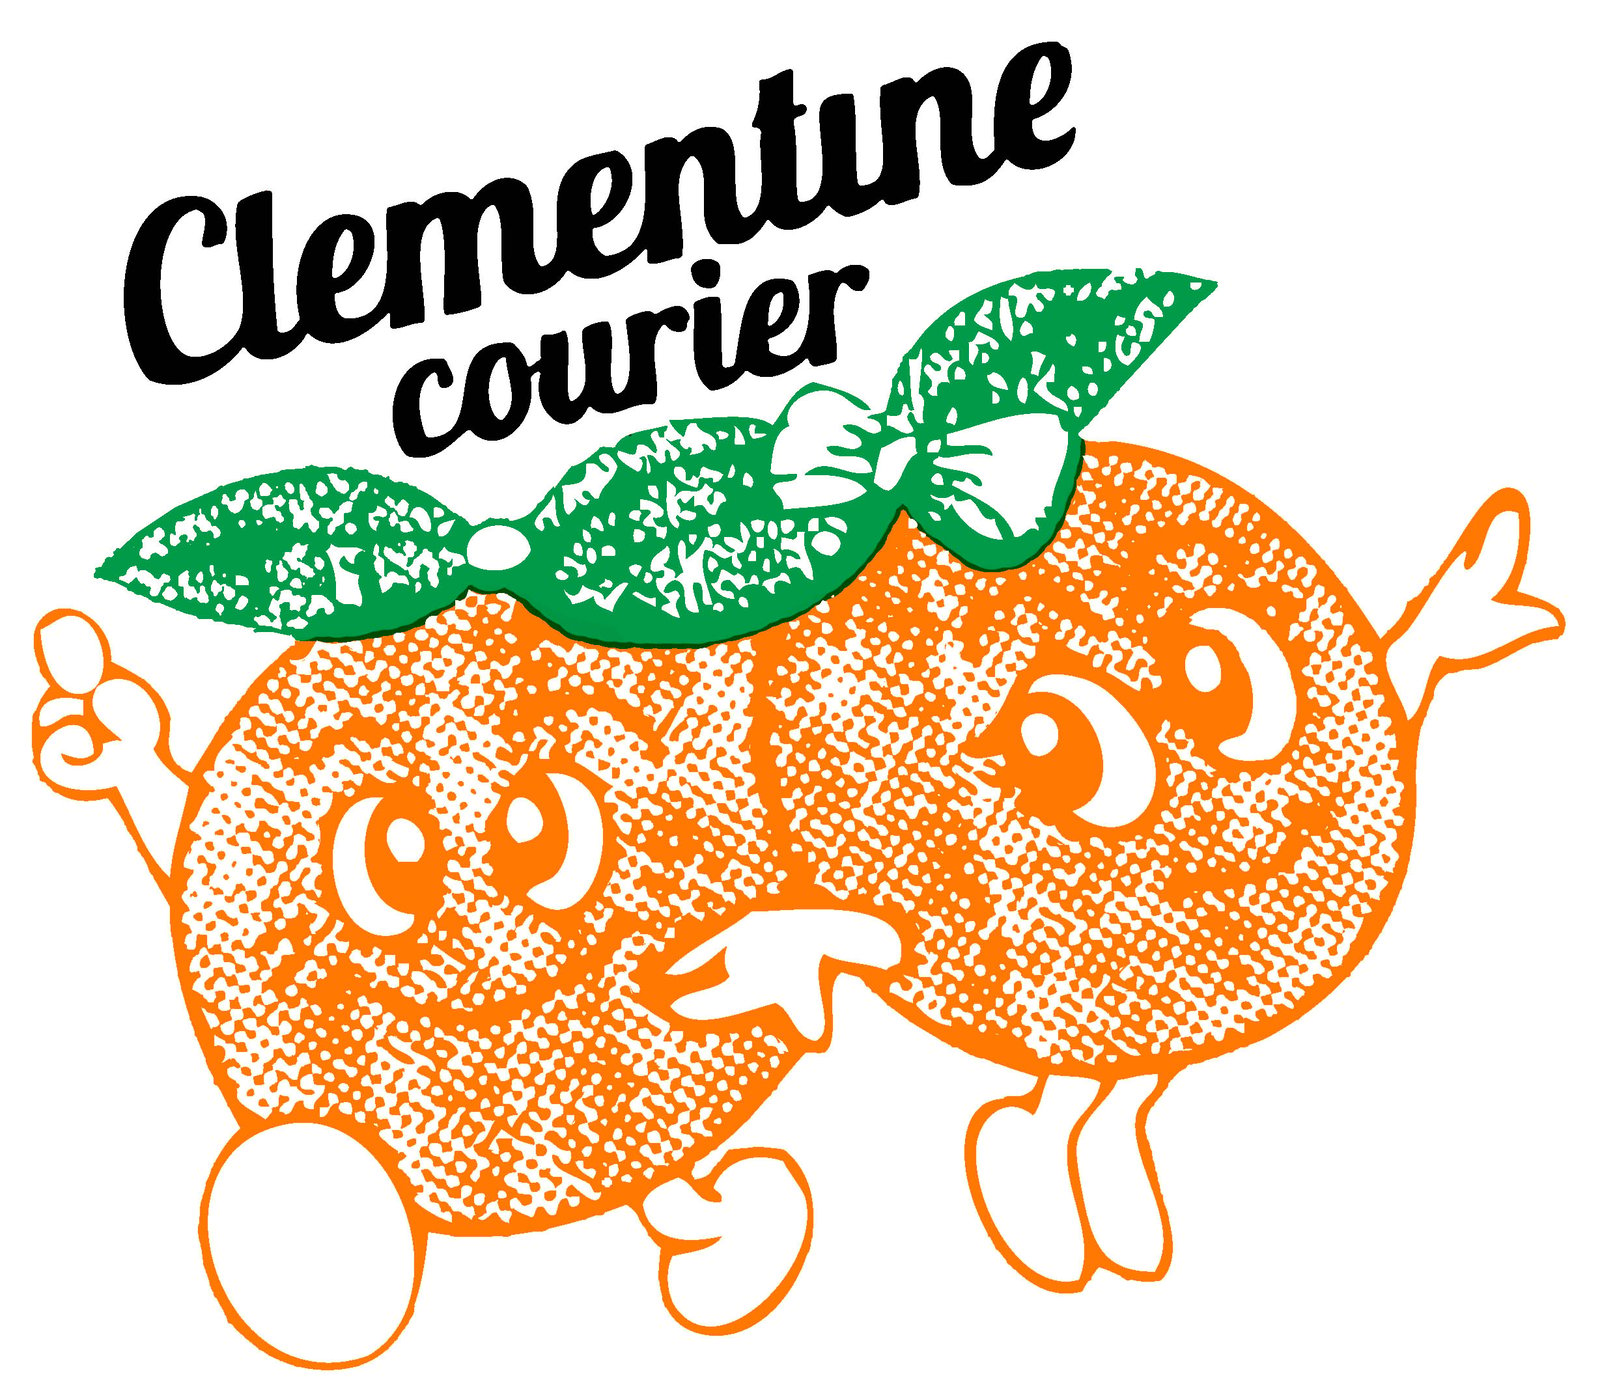 Clementine Courier